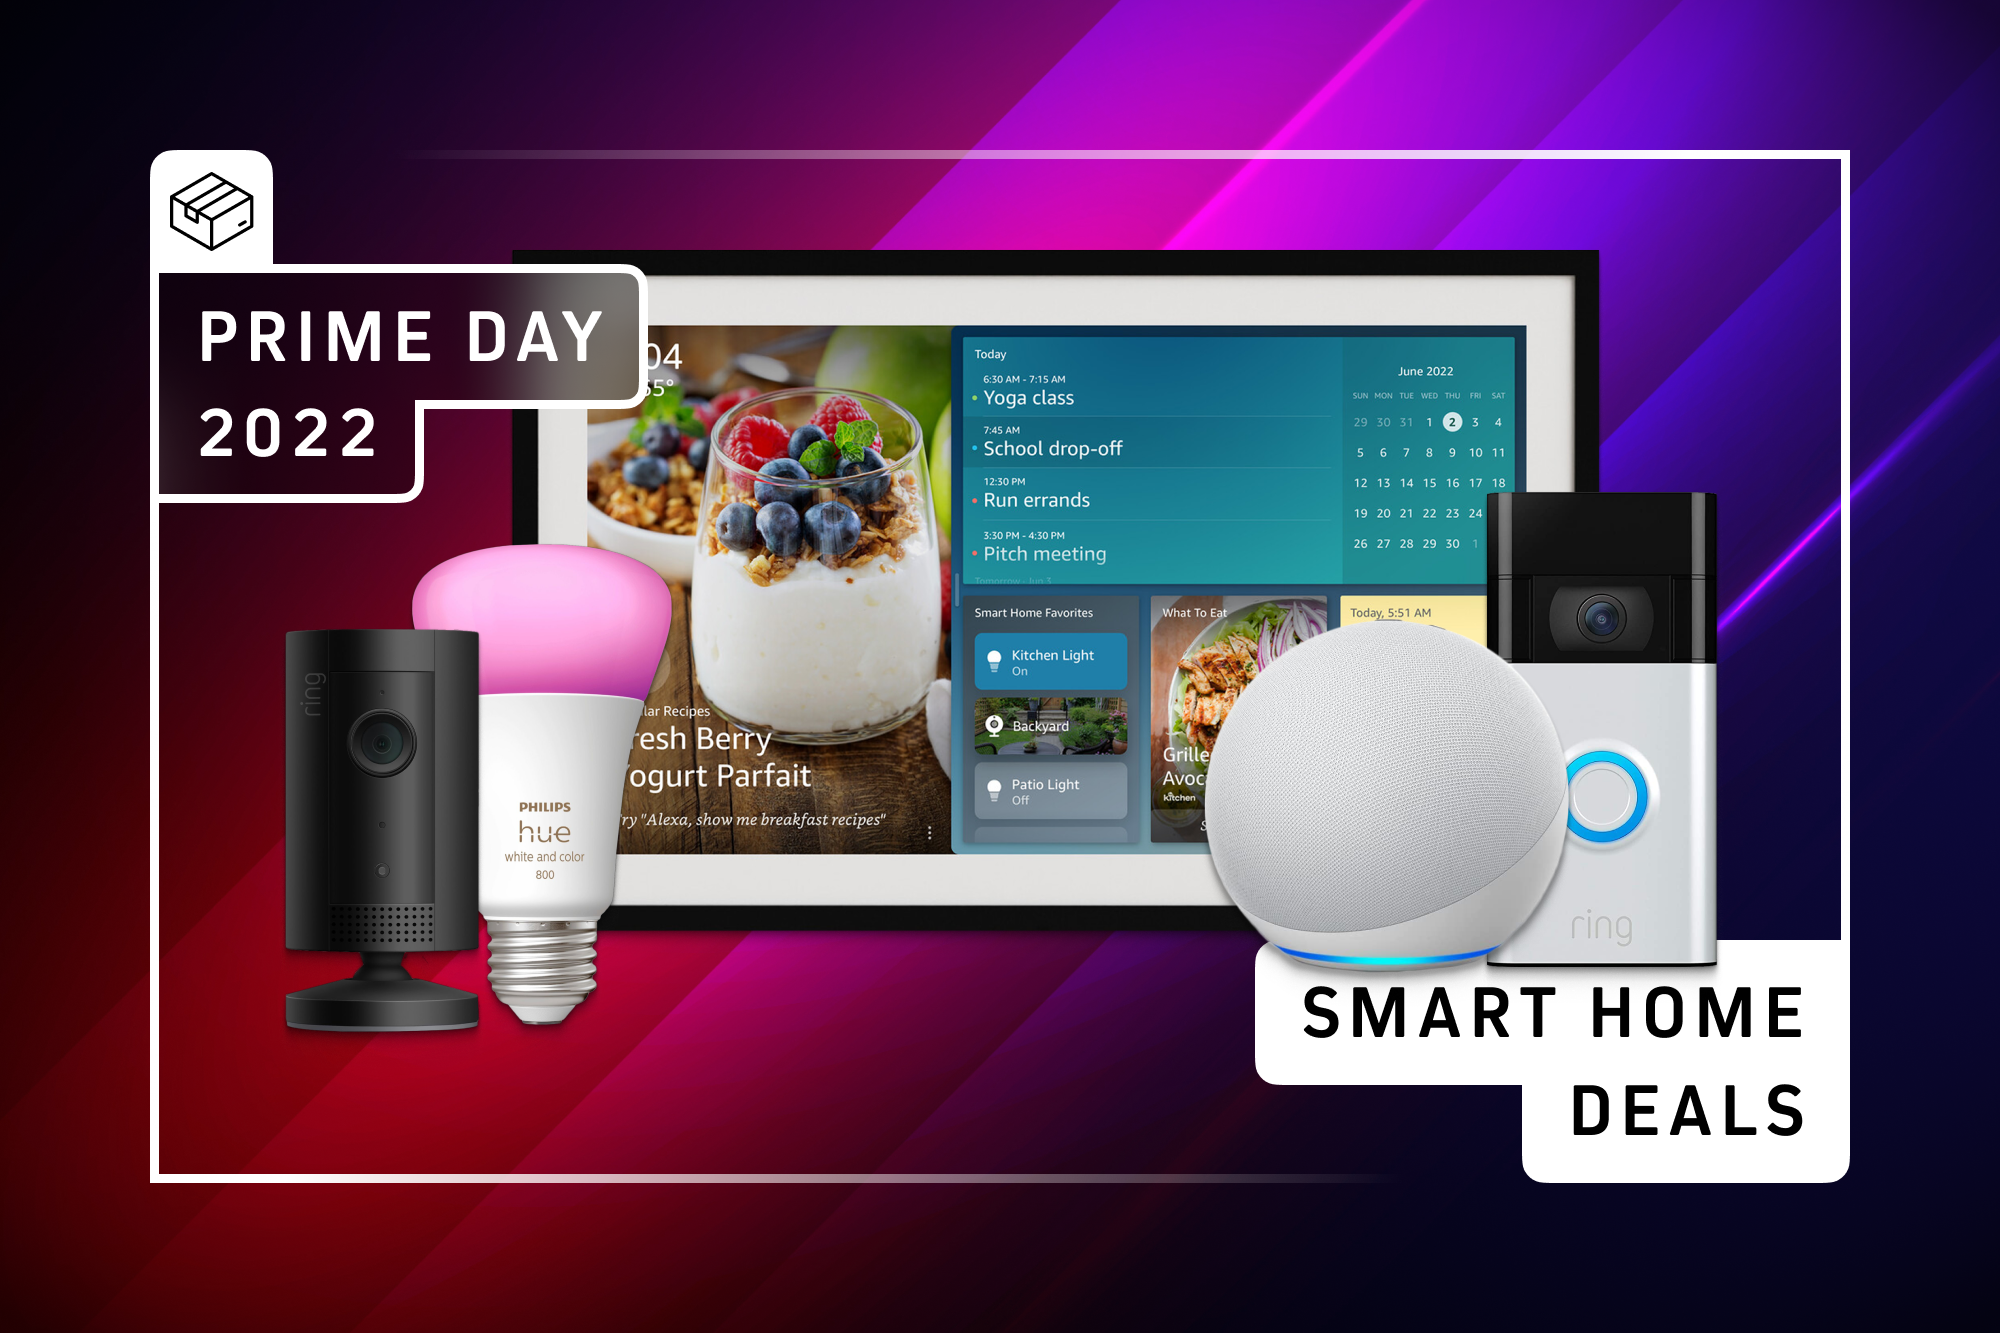 Should You Buy Smart Home Gadgets on Prime Day? - CNET